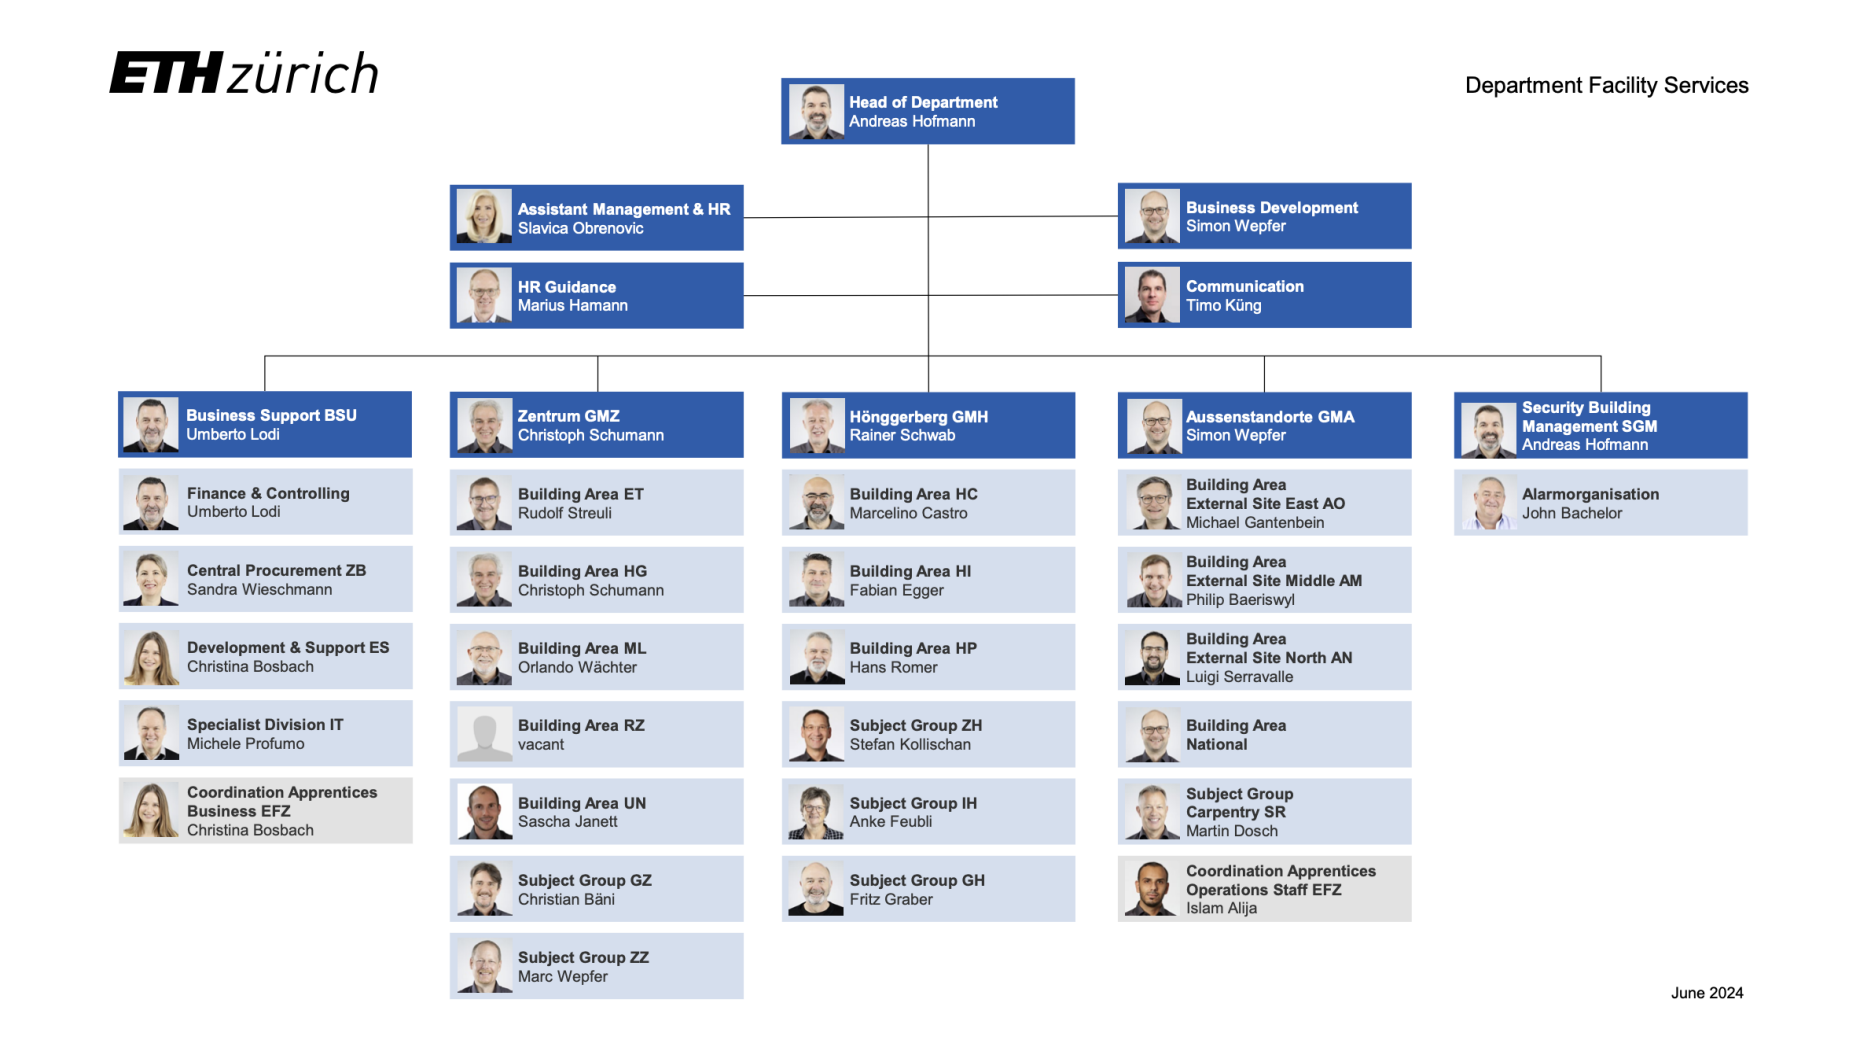 Enlarged view: Organisation chart Facility Services department